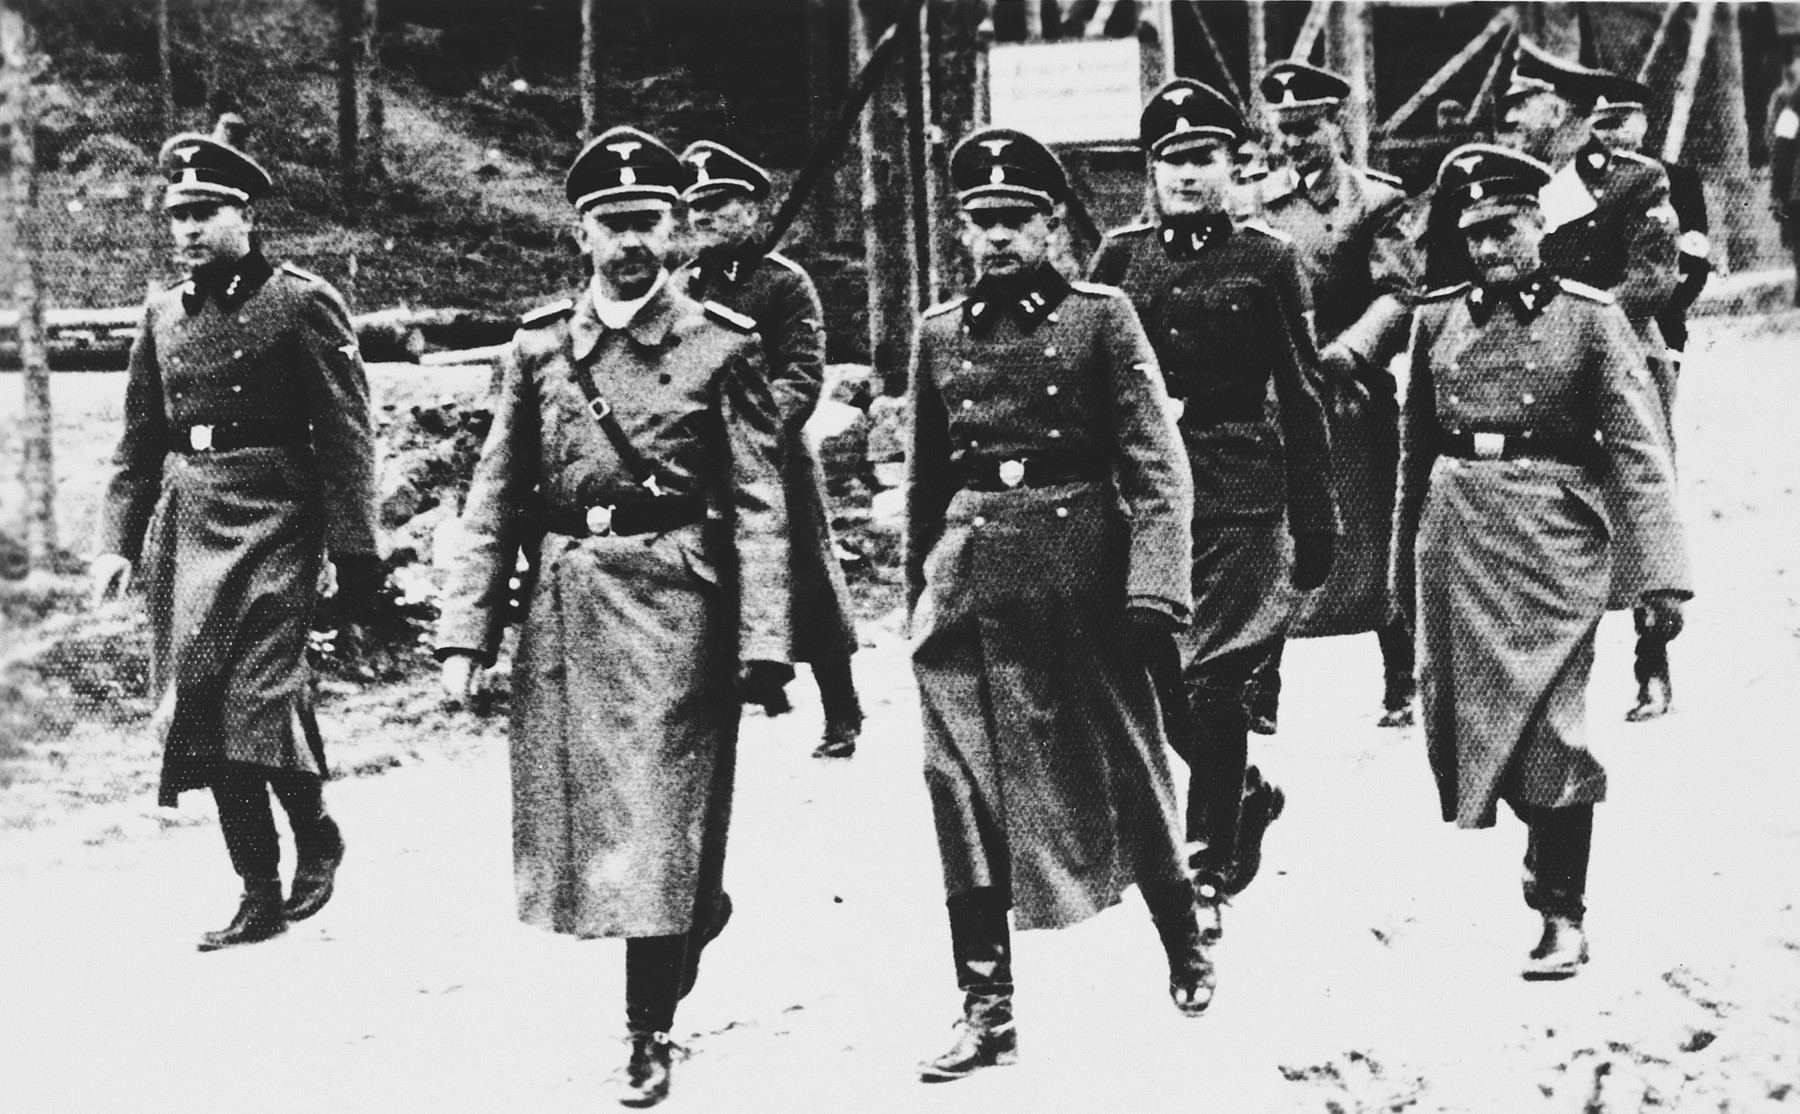 Heinrich Himmler goes on an inspection tour of the Flossenbuerg concentration camp.

Heinrich Himmler is pictured second from the left.  To his right the camp commandant Karl Künstler, to his far right the adjutant Ludwig Baumgartner. In the back: Karl Wolff and Oswald Pohl (from left).